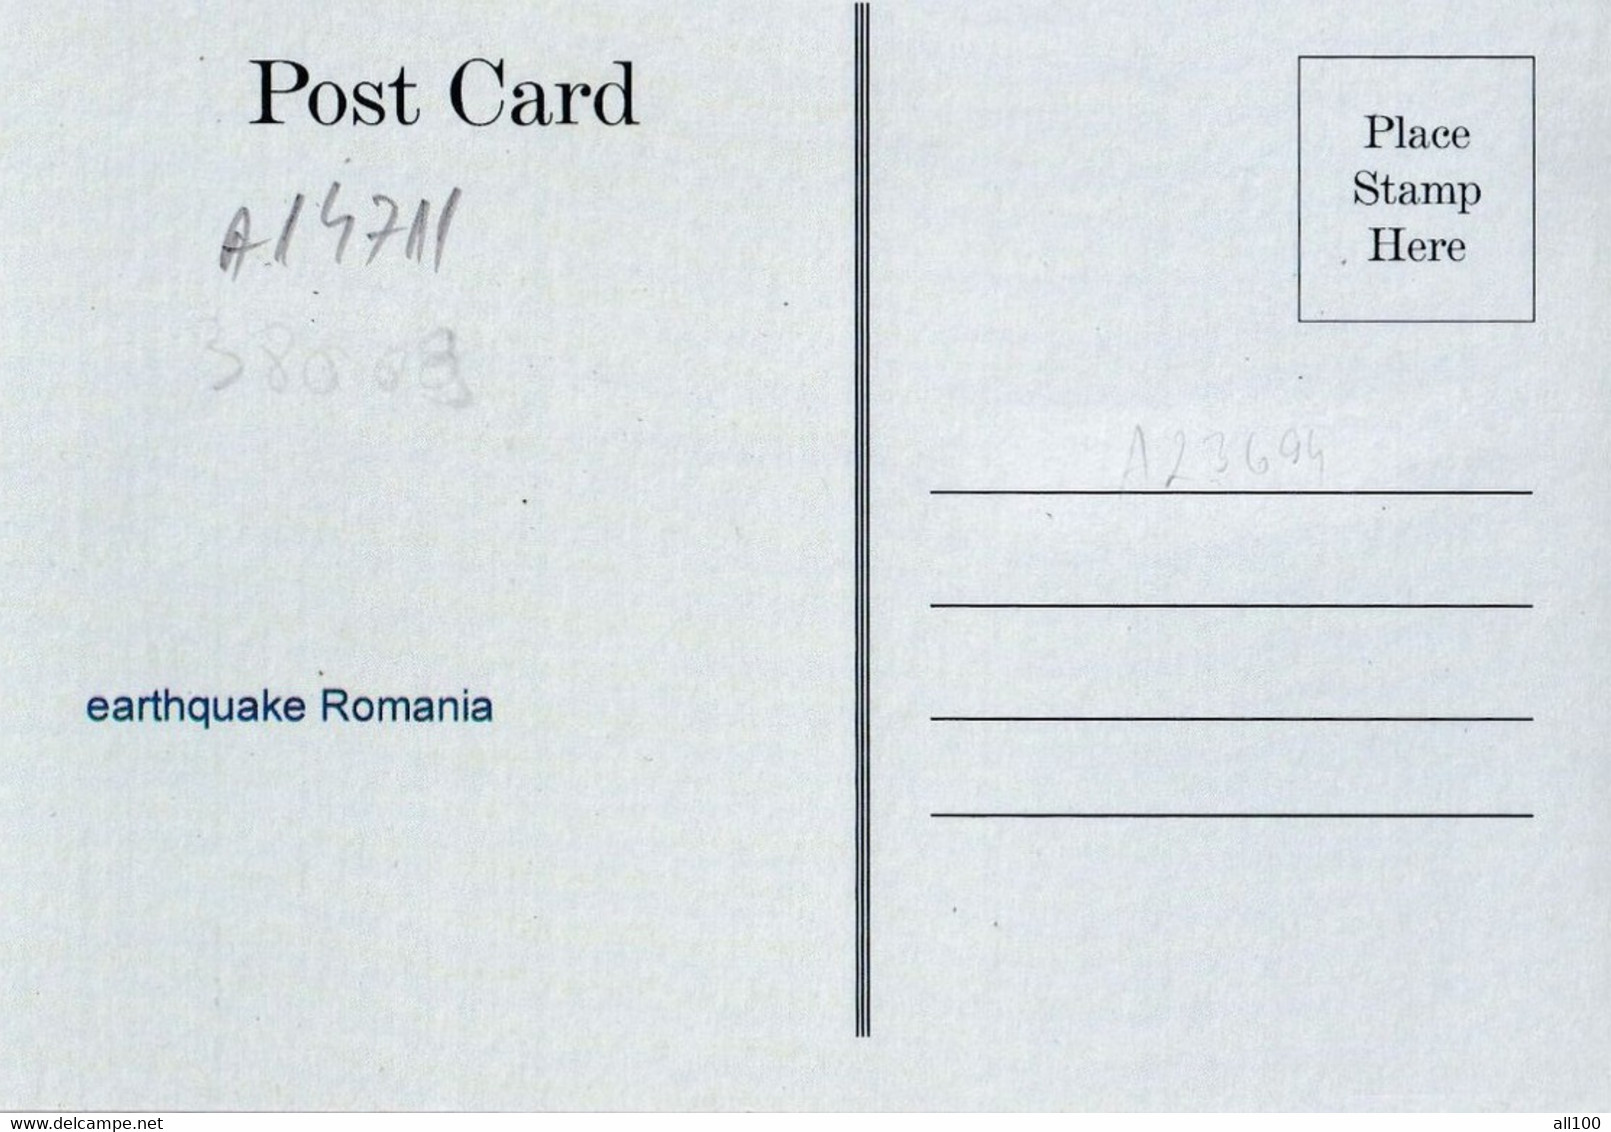 A14711 - EARTHQUAKE ROMANIA  AND DICTATOR NICOLAE CEAUSESCU  POSTCARD - Personnages